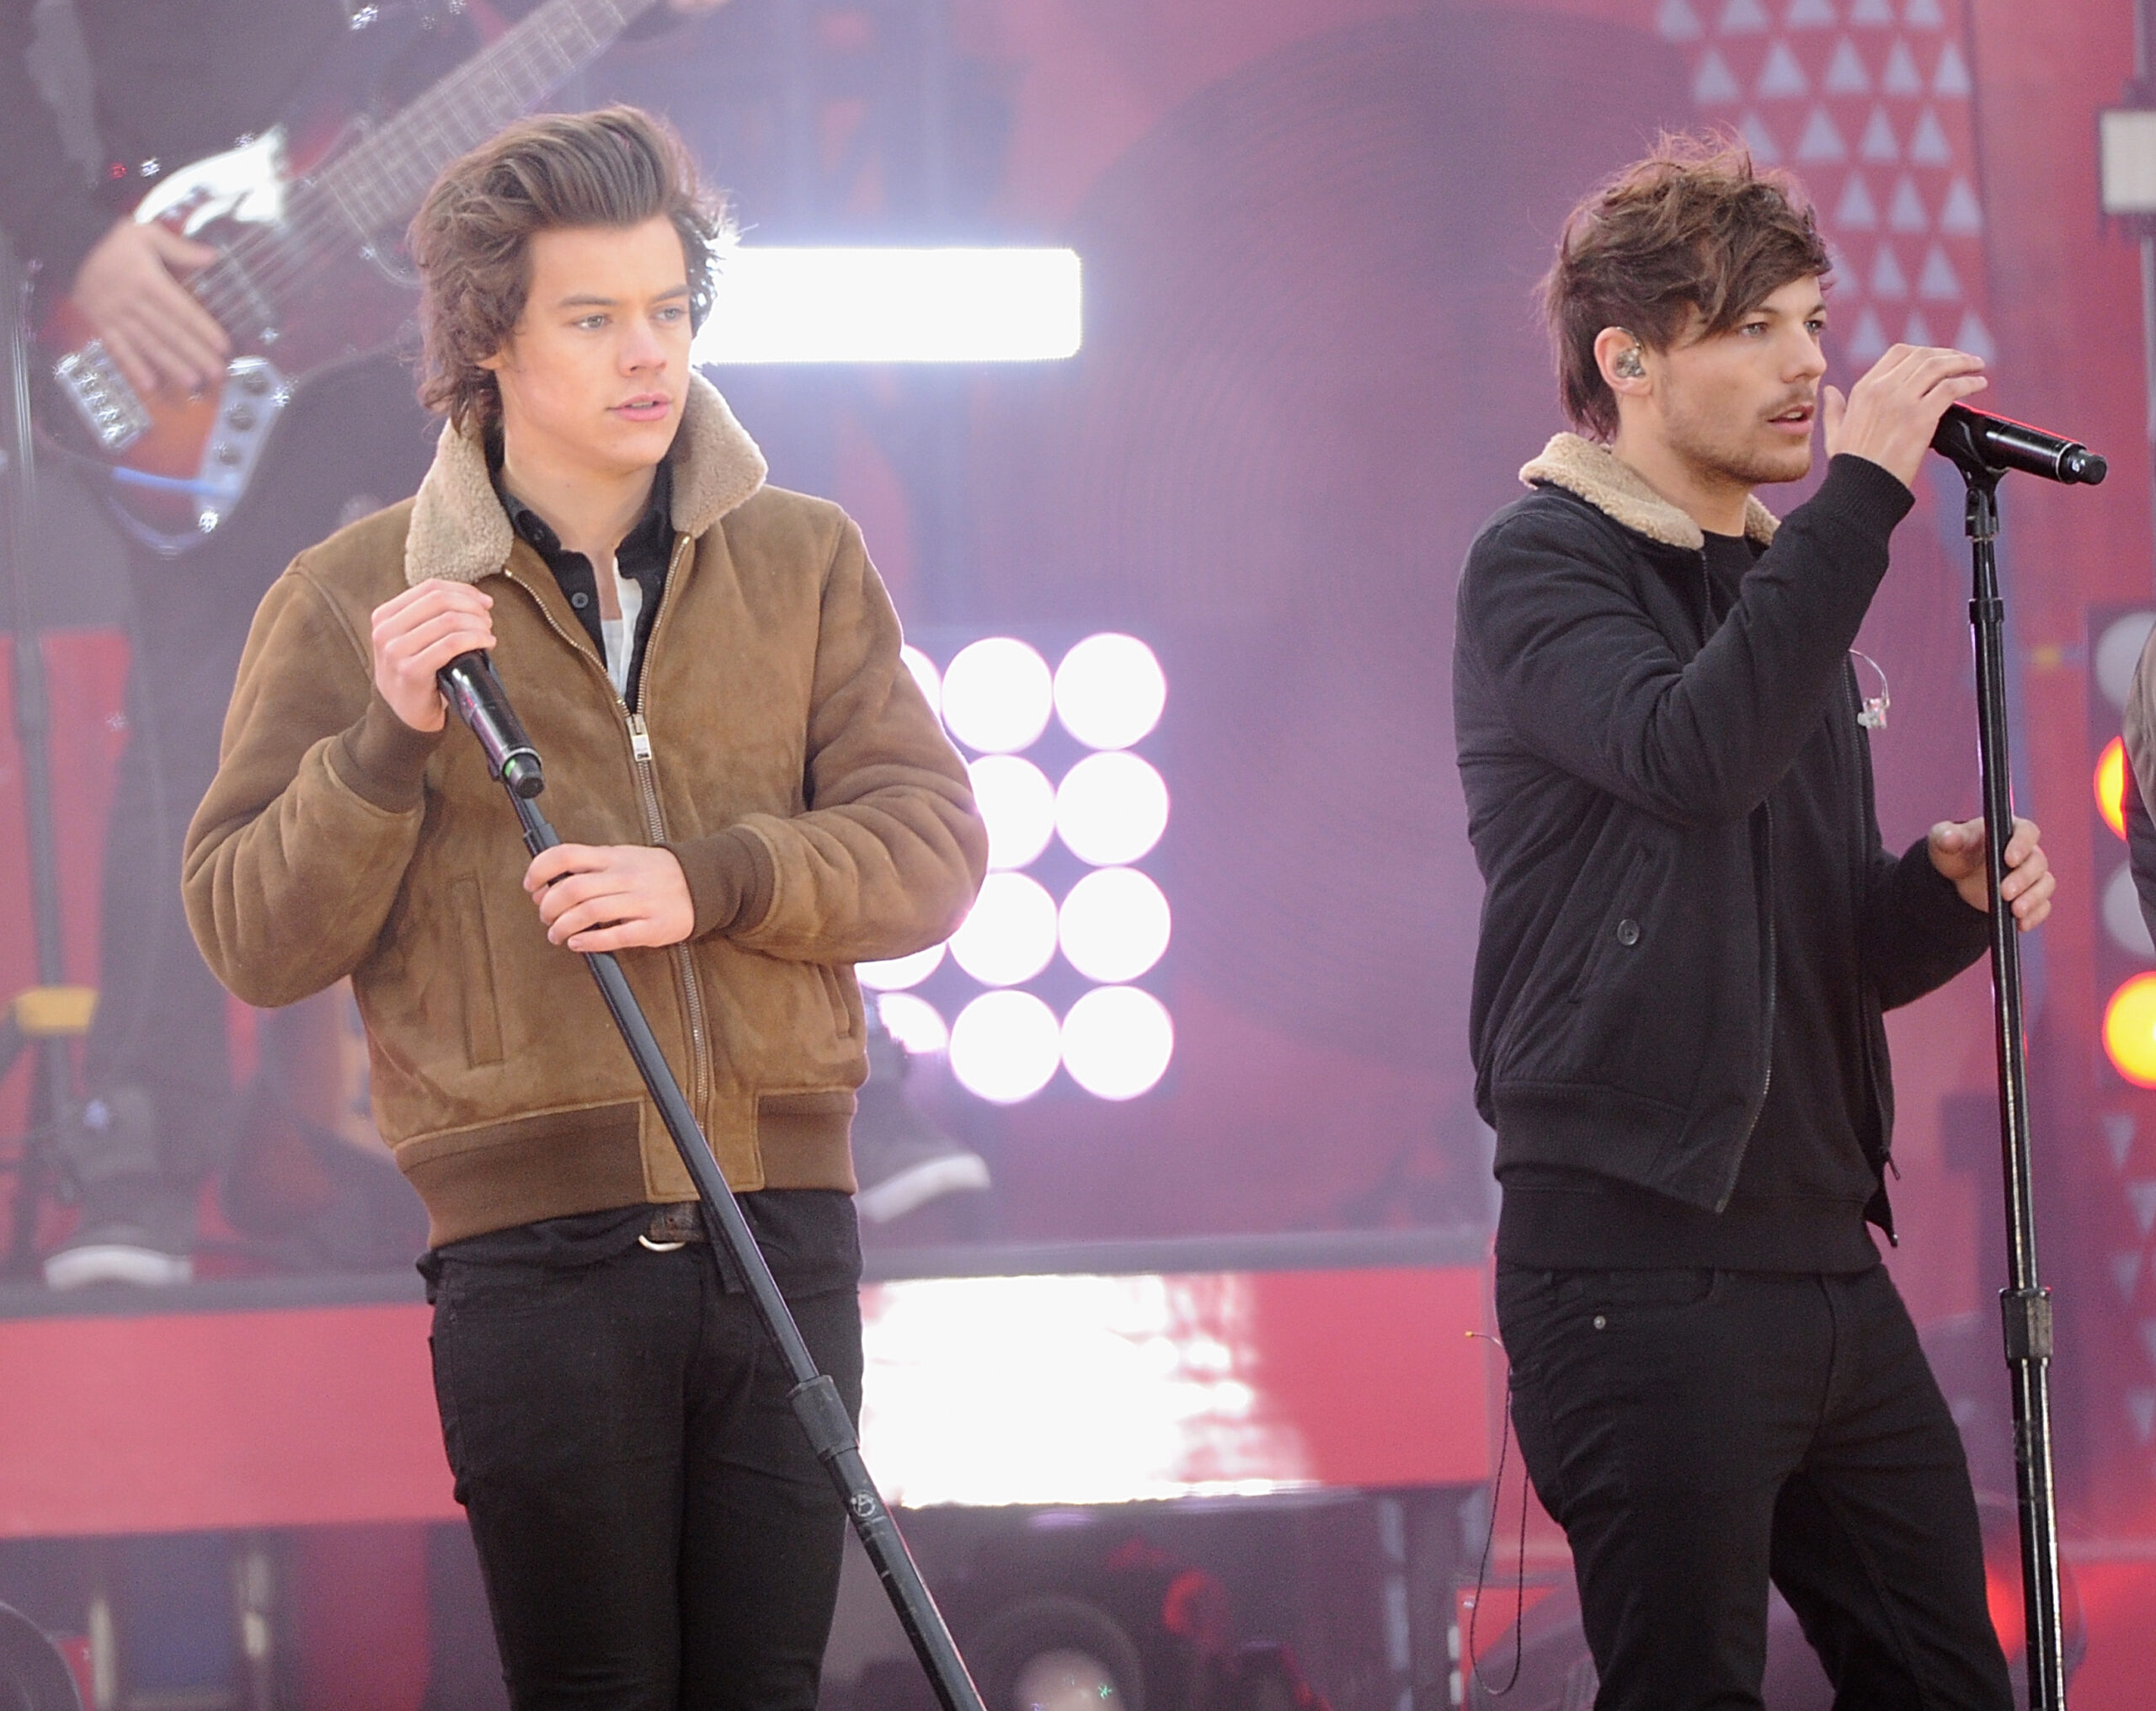 One Direction Perform On ABC's "Good Morning America", Louis Tomlinson Addresses Years-Long Harry Styles Dating Rumors